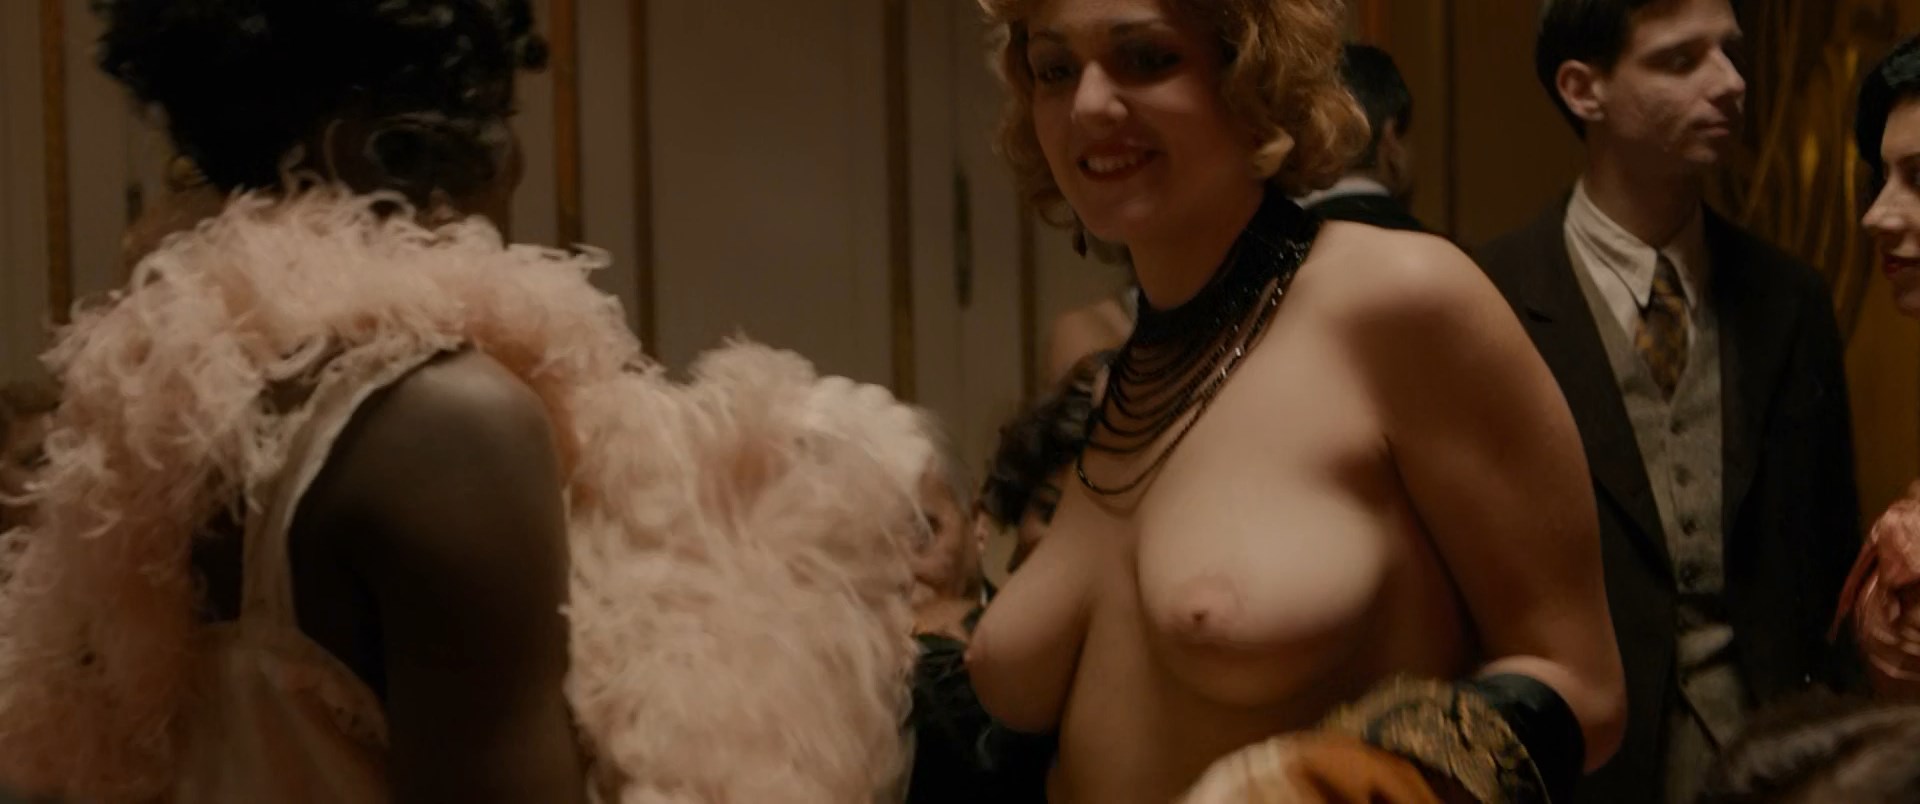 Eve hewson tits - 🧡 Eve Hewson Nude Sex Scene from 'The Knick' -...